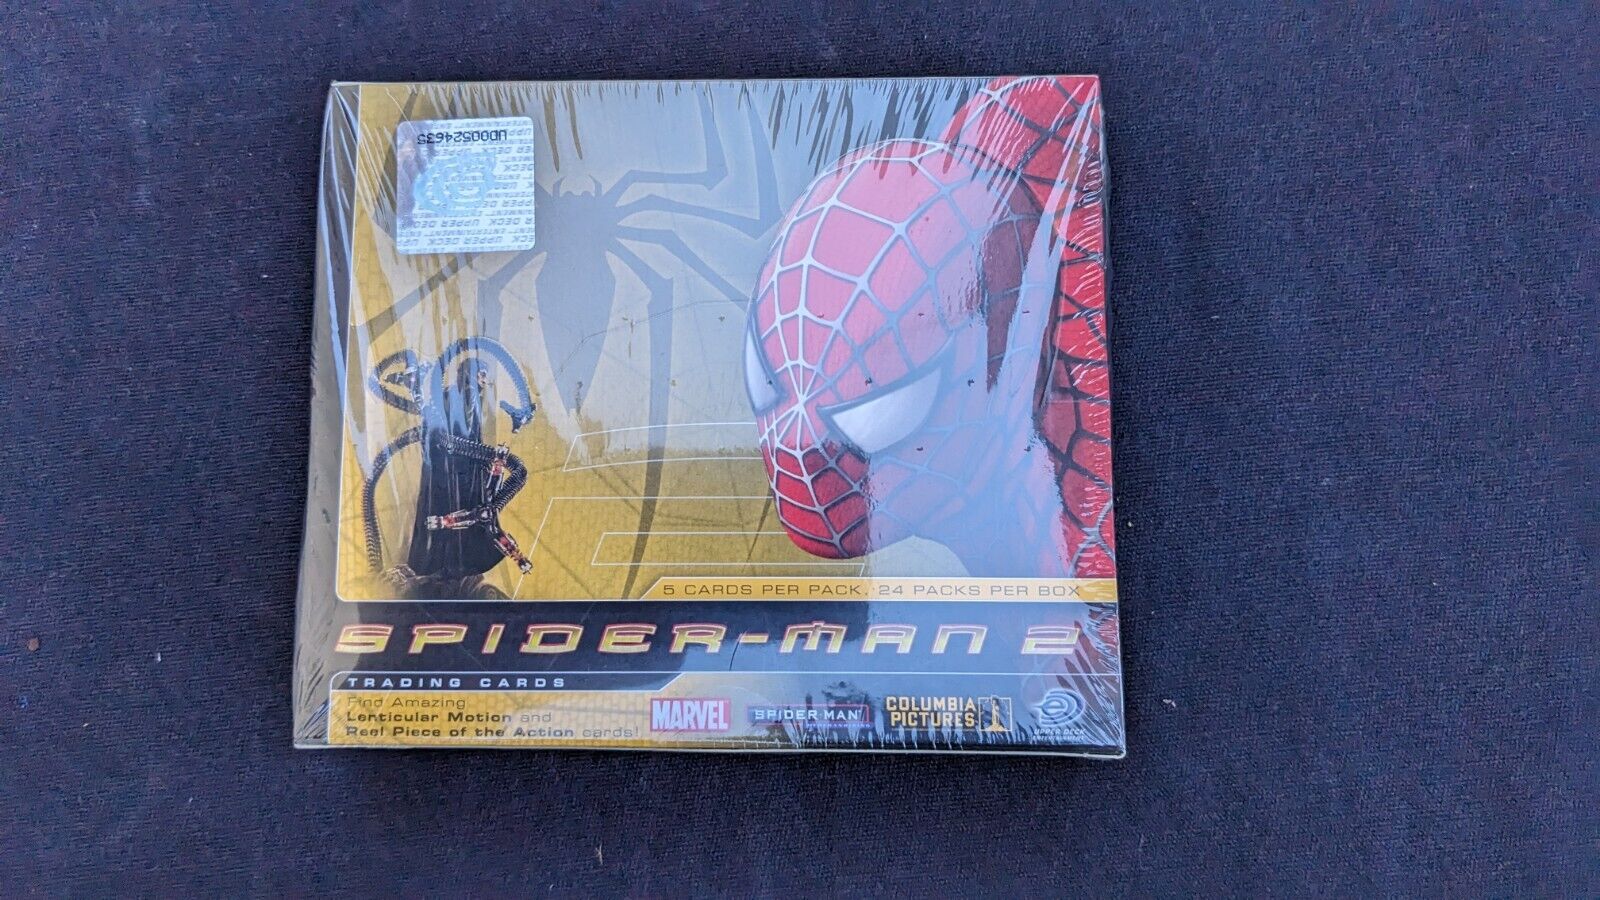 2004 Upper Deck Spider-Man 2 Trading Card Booster Boxes - 24 Packs of 5 Cards